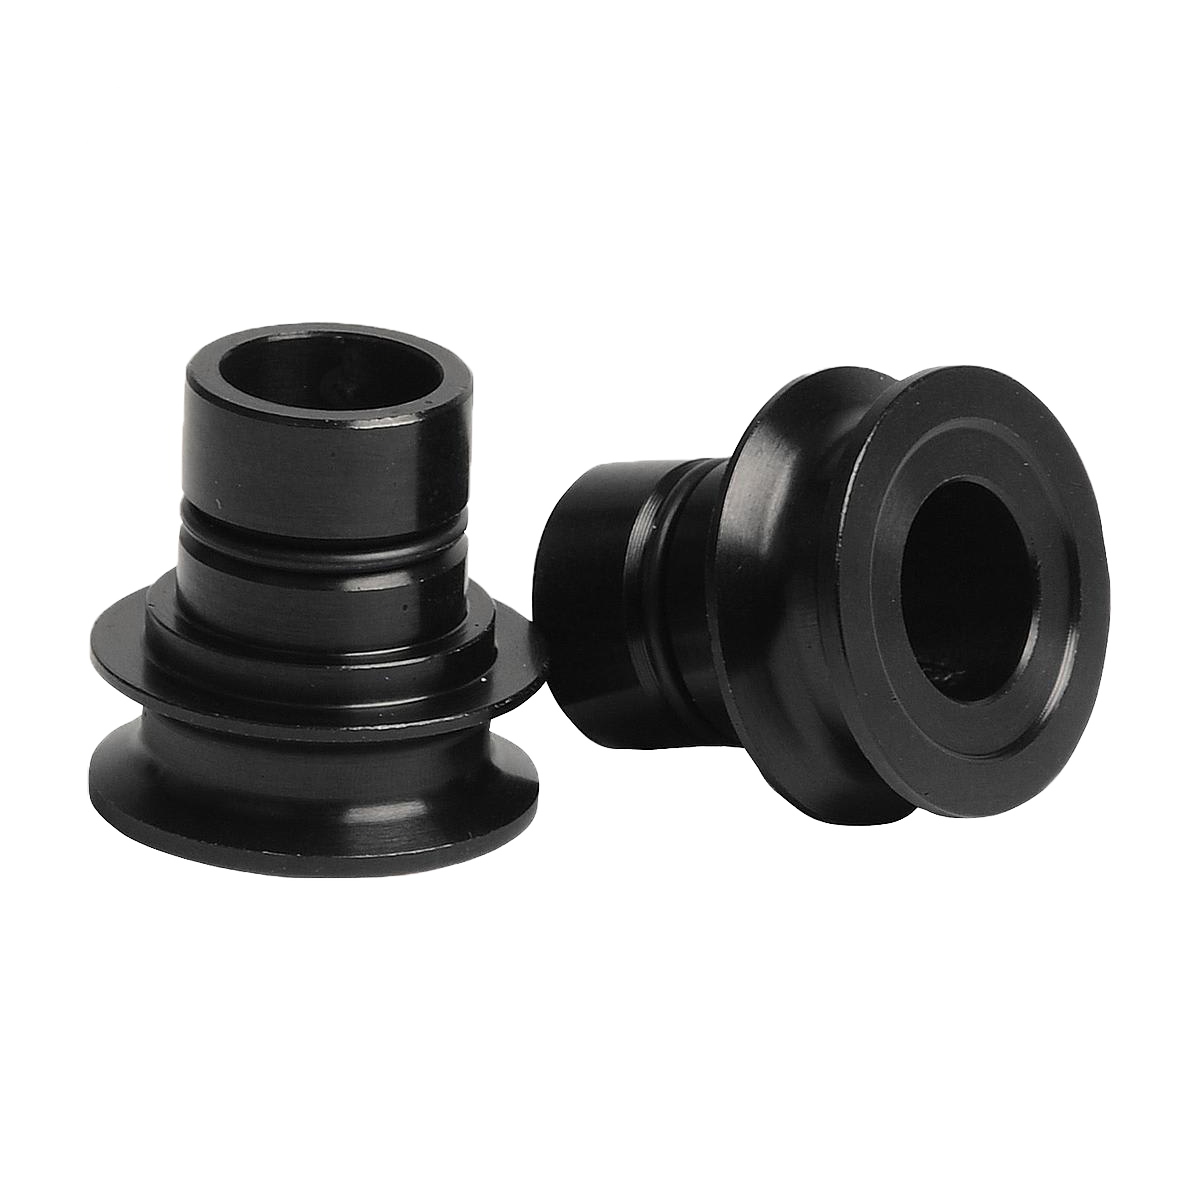 Front Hub End caps 15x110mm for Pro 4/Pro 2 EVO hubs